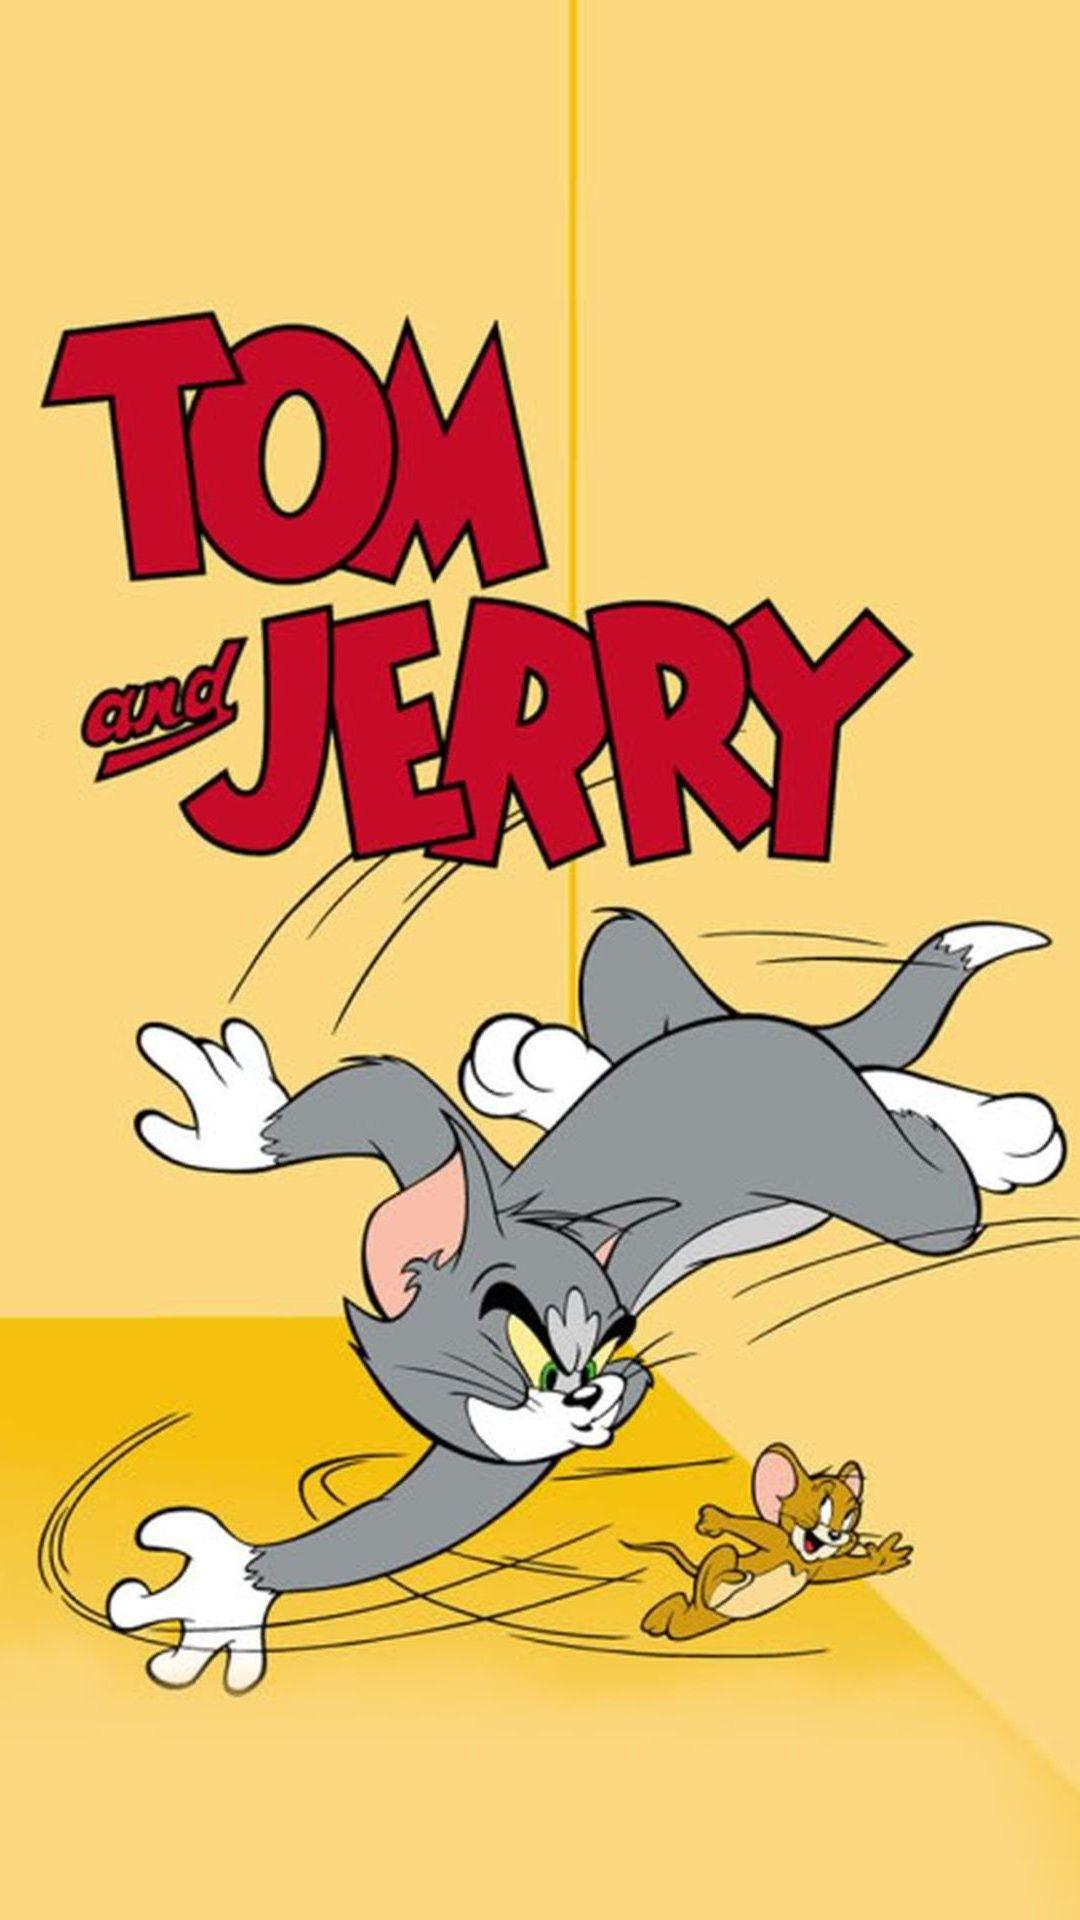 Tom Jerry And Spike Cartoon Hd Wallpapers For Mobile Phones Tablet And  Laptops 19201200  Wallpaperbetter